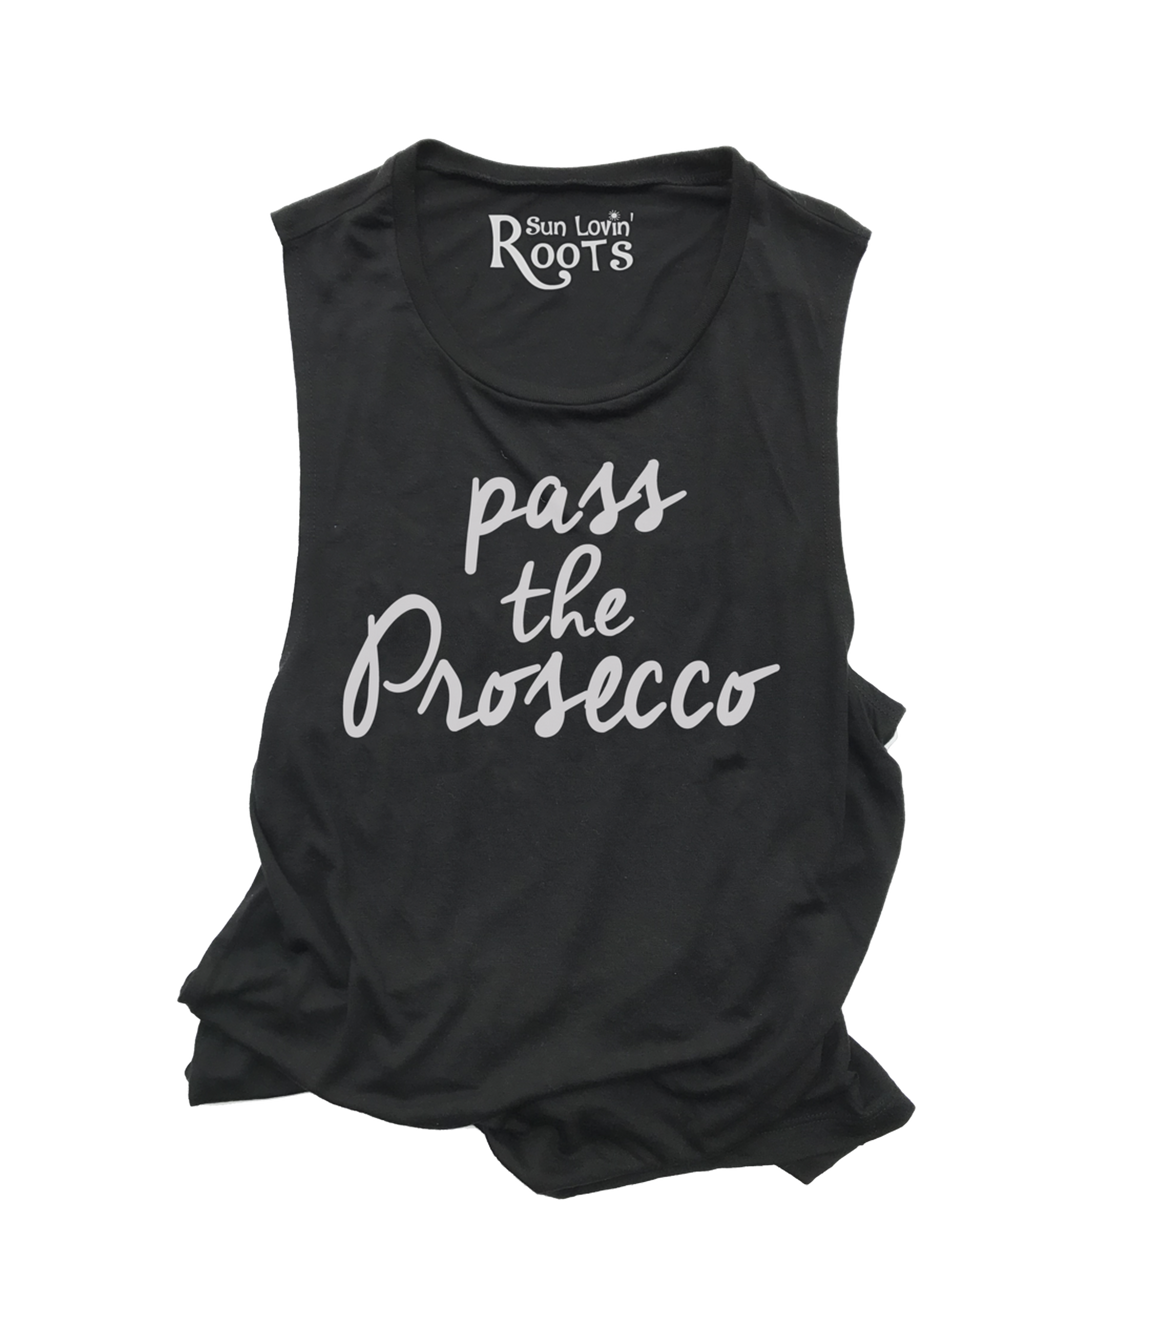 'Pass The Prosecco' Mikey Muscle Tank